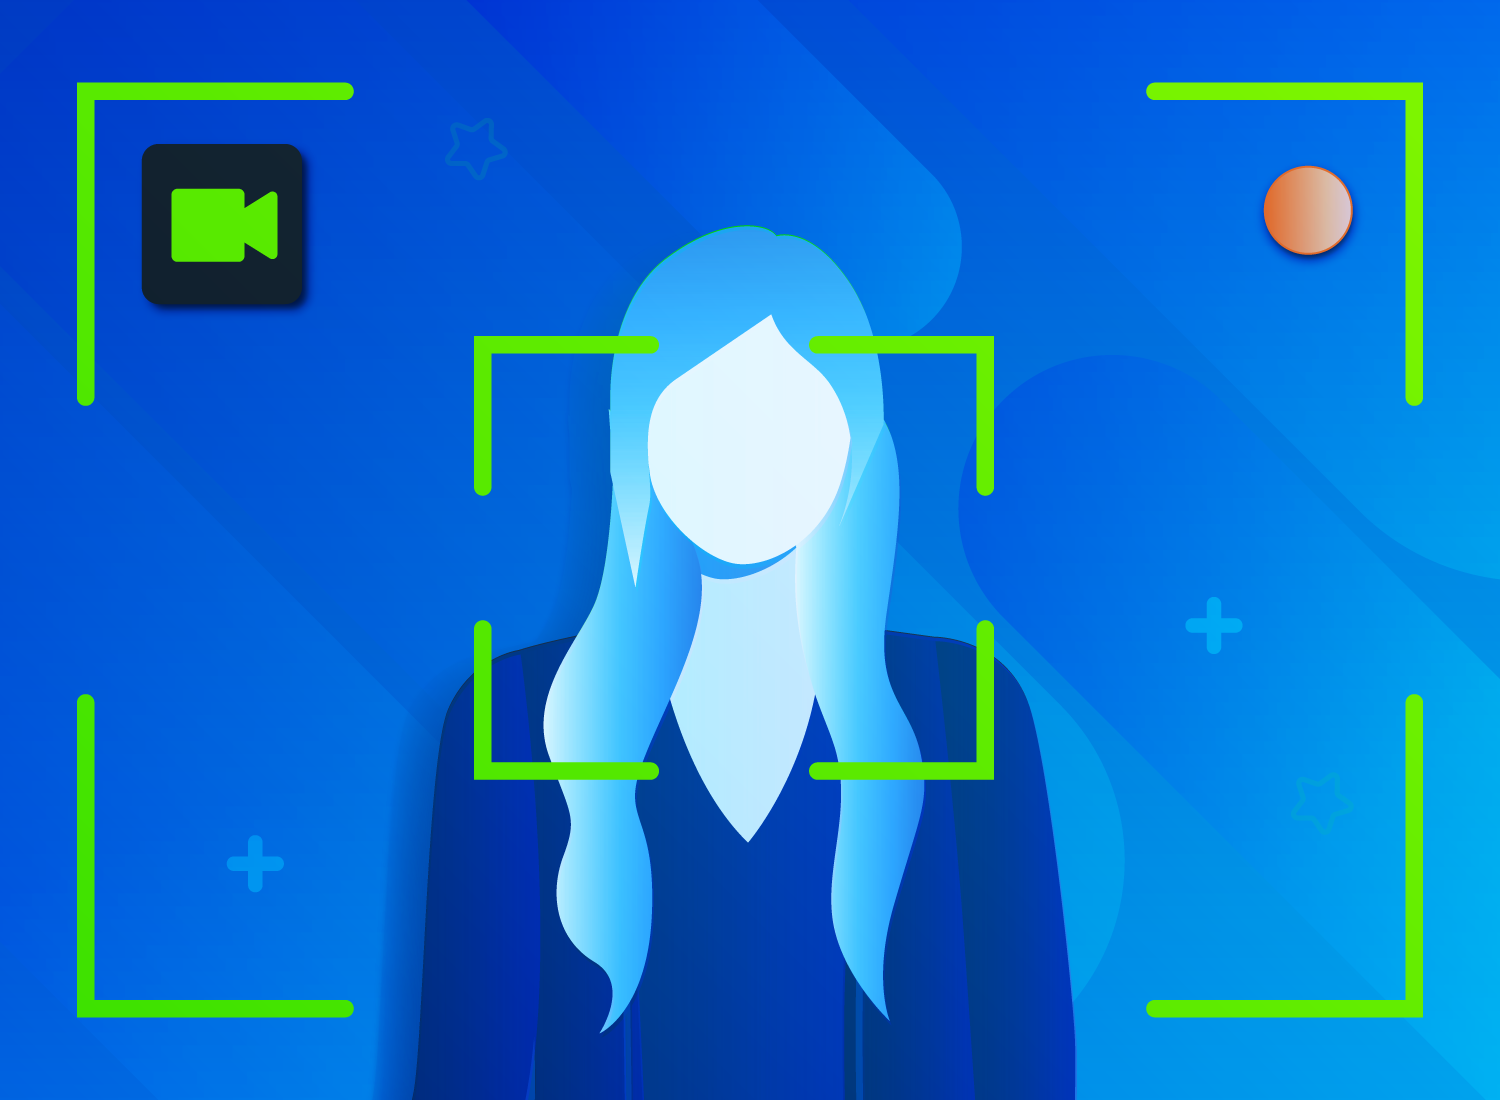 Stylized image illustrating the setup for recording a perfect live streaming video. The central focus is on a figure with a camera focus frame around her, indicating the live subject of a stream. In the corners are abstract icons symbolizing video recording and editing, set against a dynamic blue background with digital motifs.